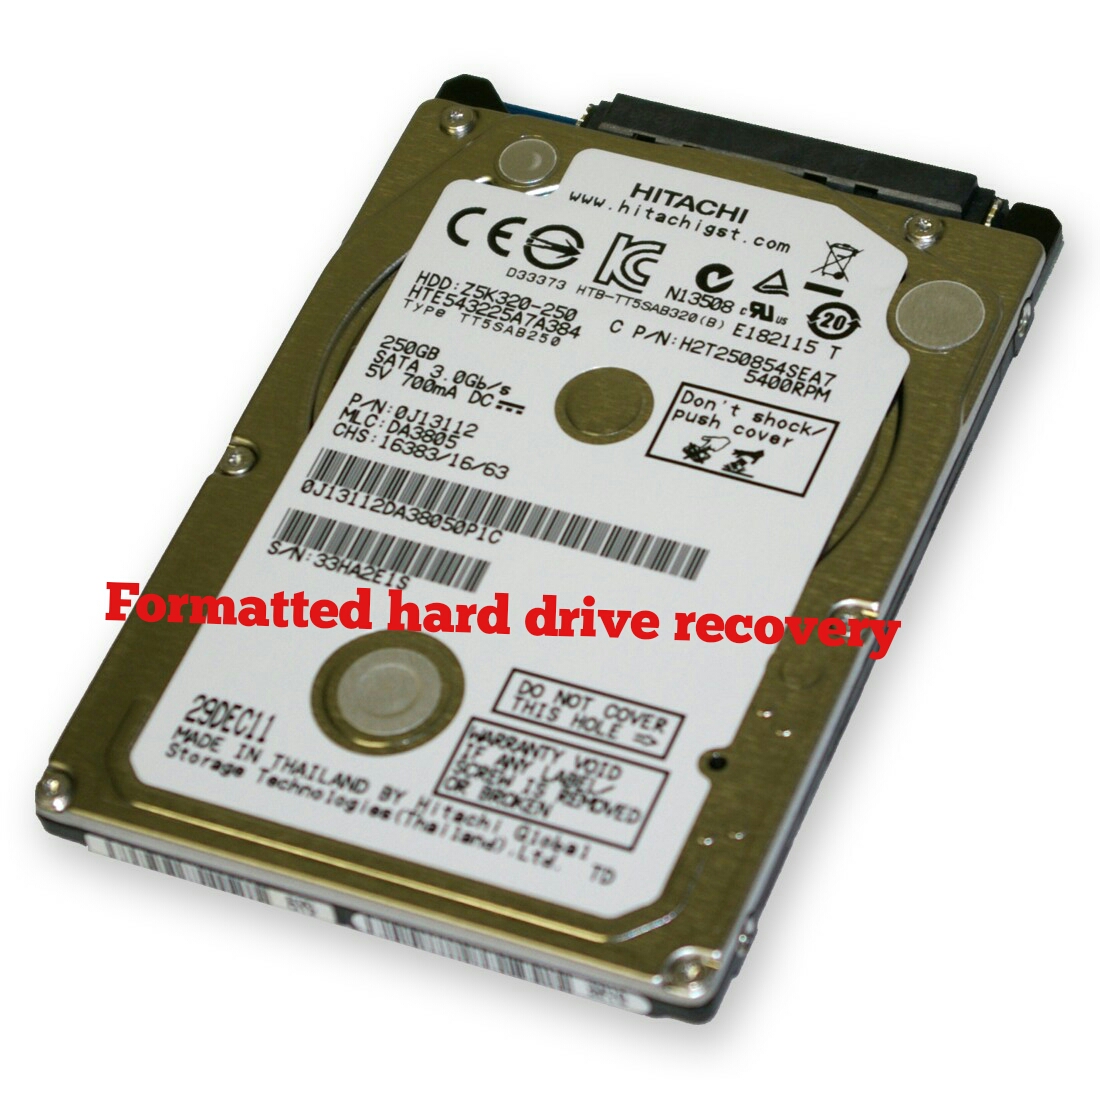 How to recover files from a formatted hard drive 